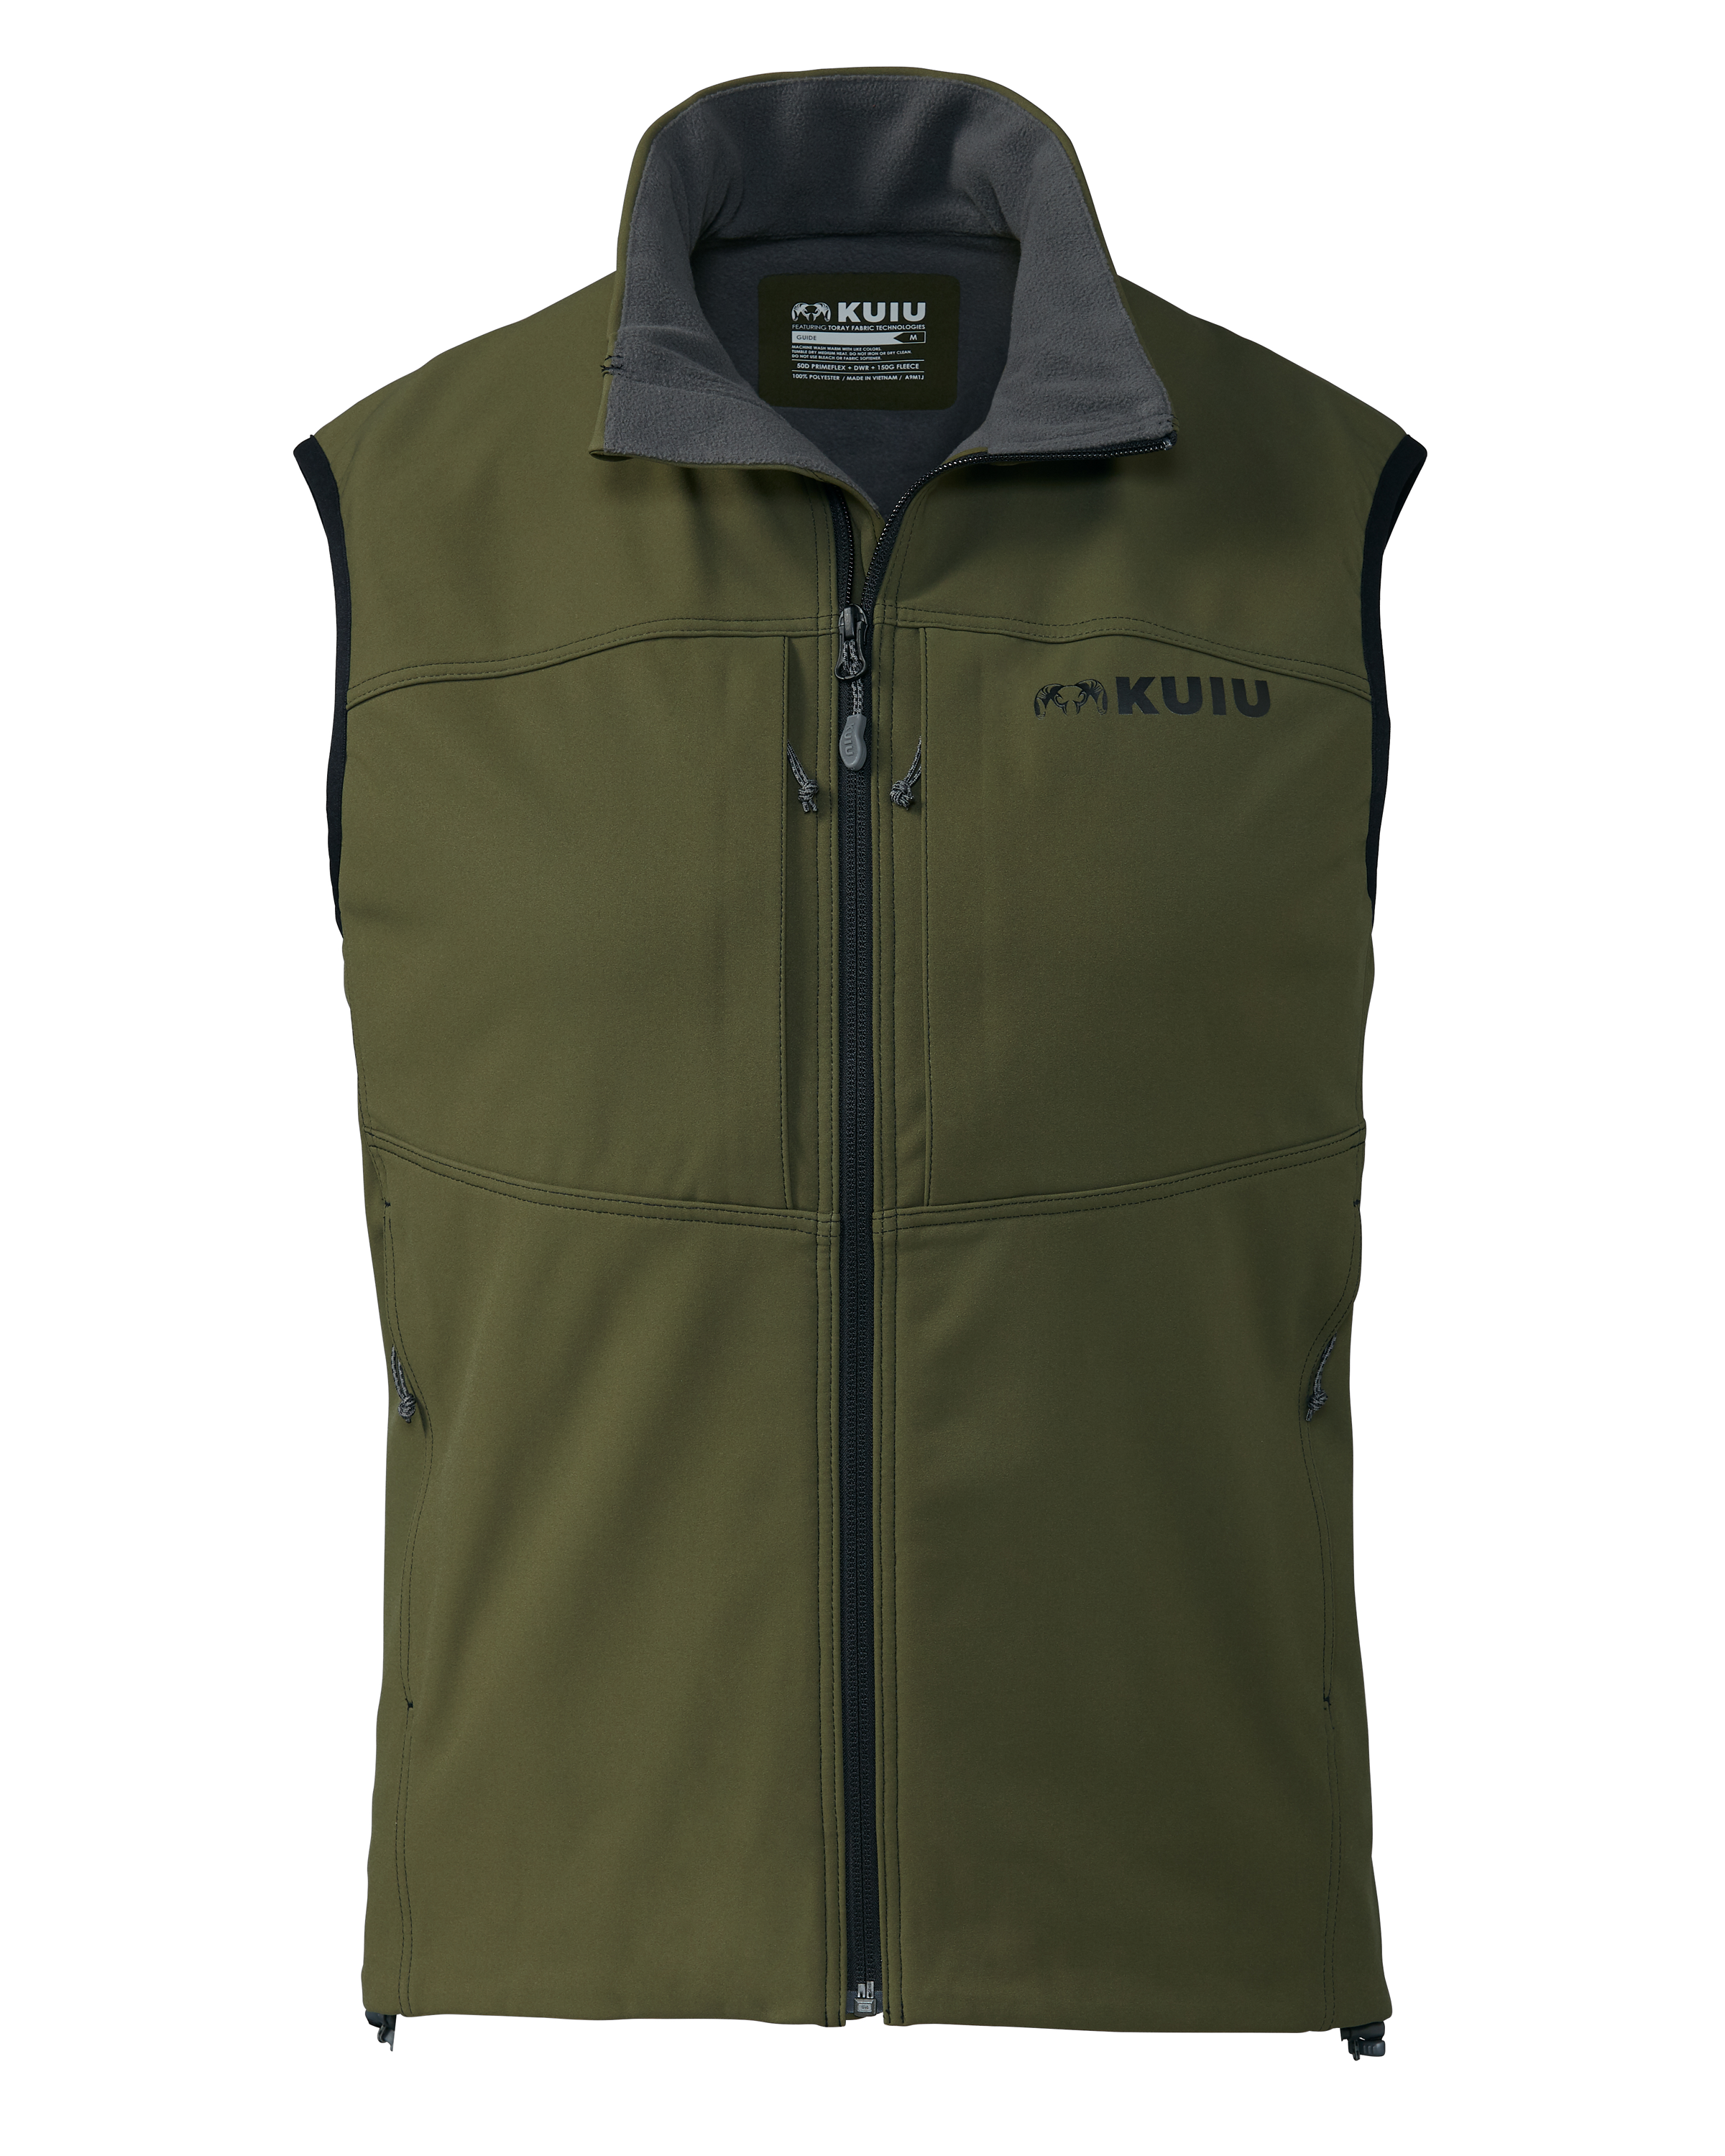 KUIU Guide DCS Hunting Vest in Olive | Size XL